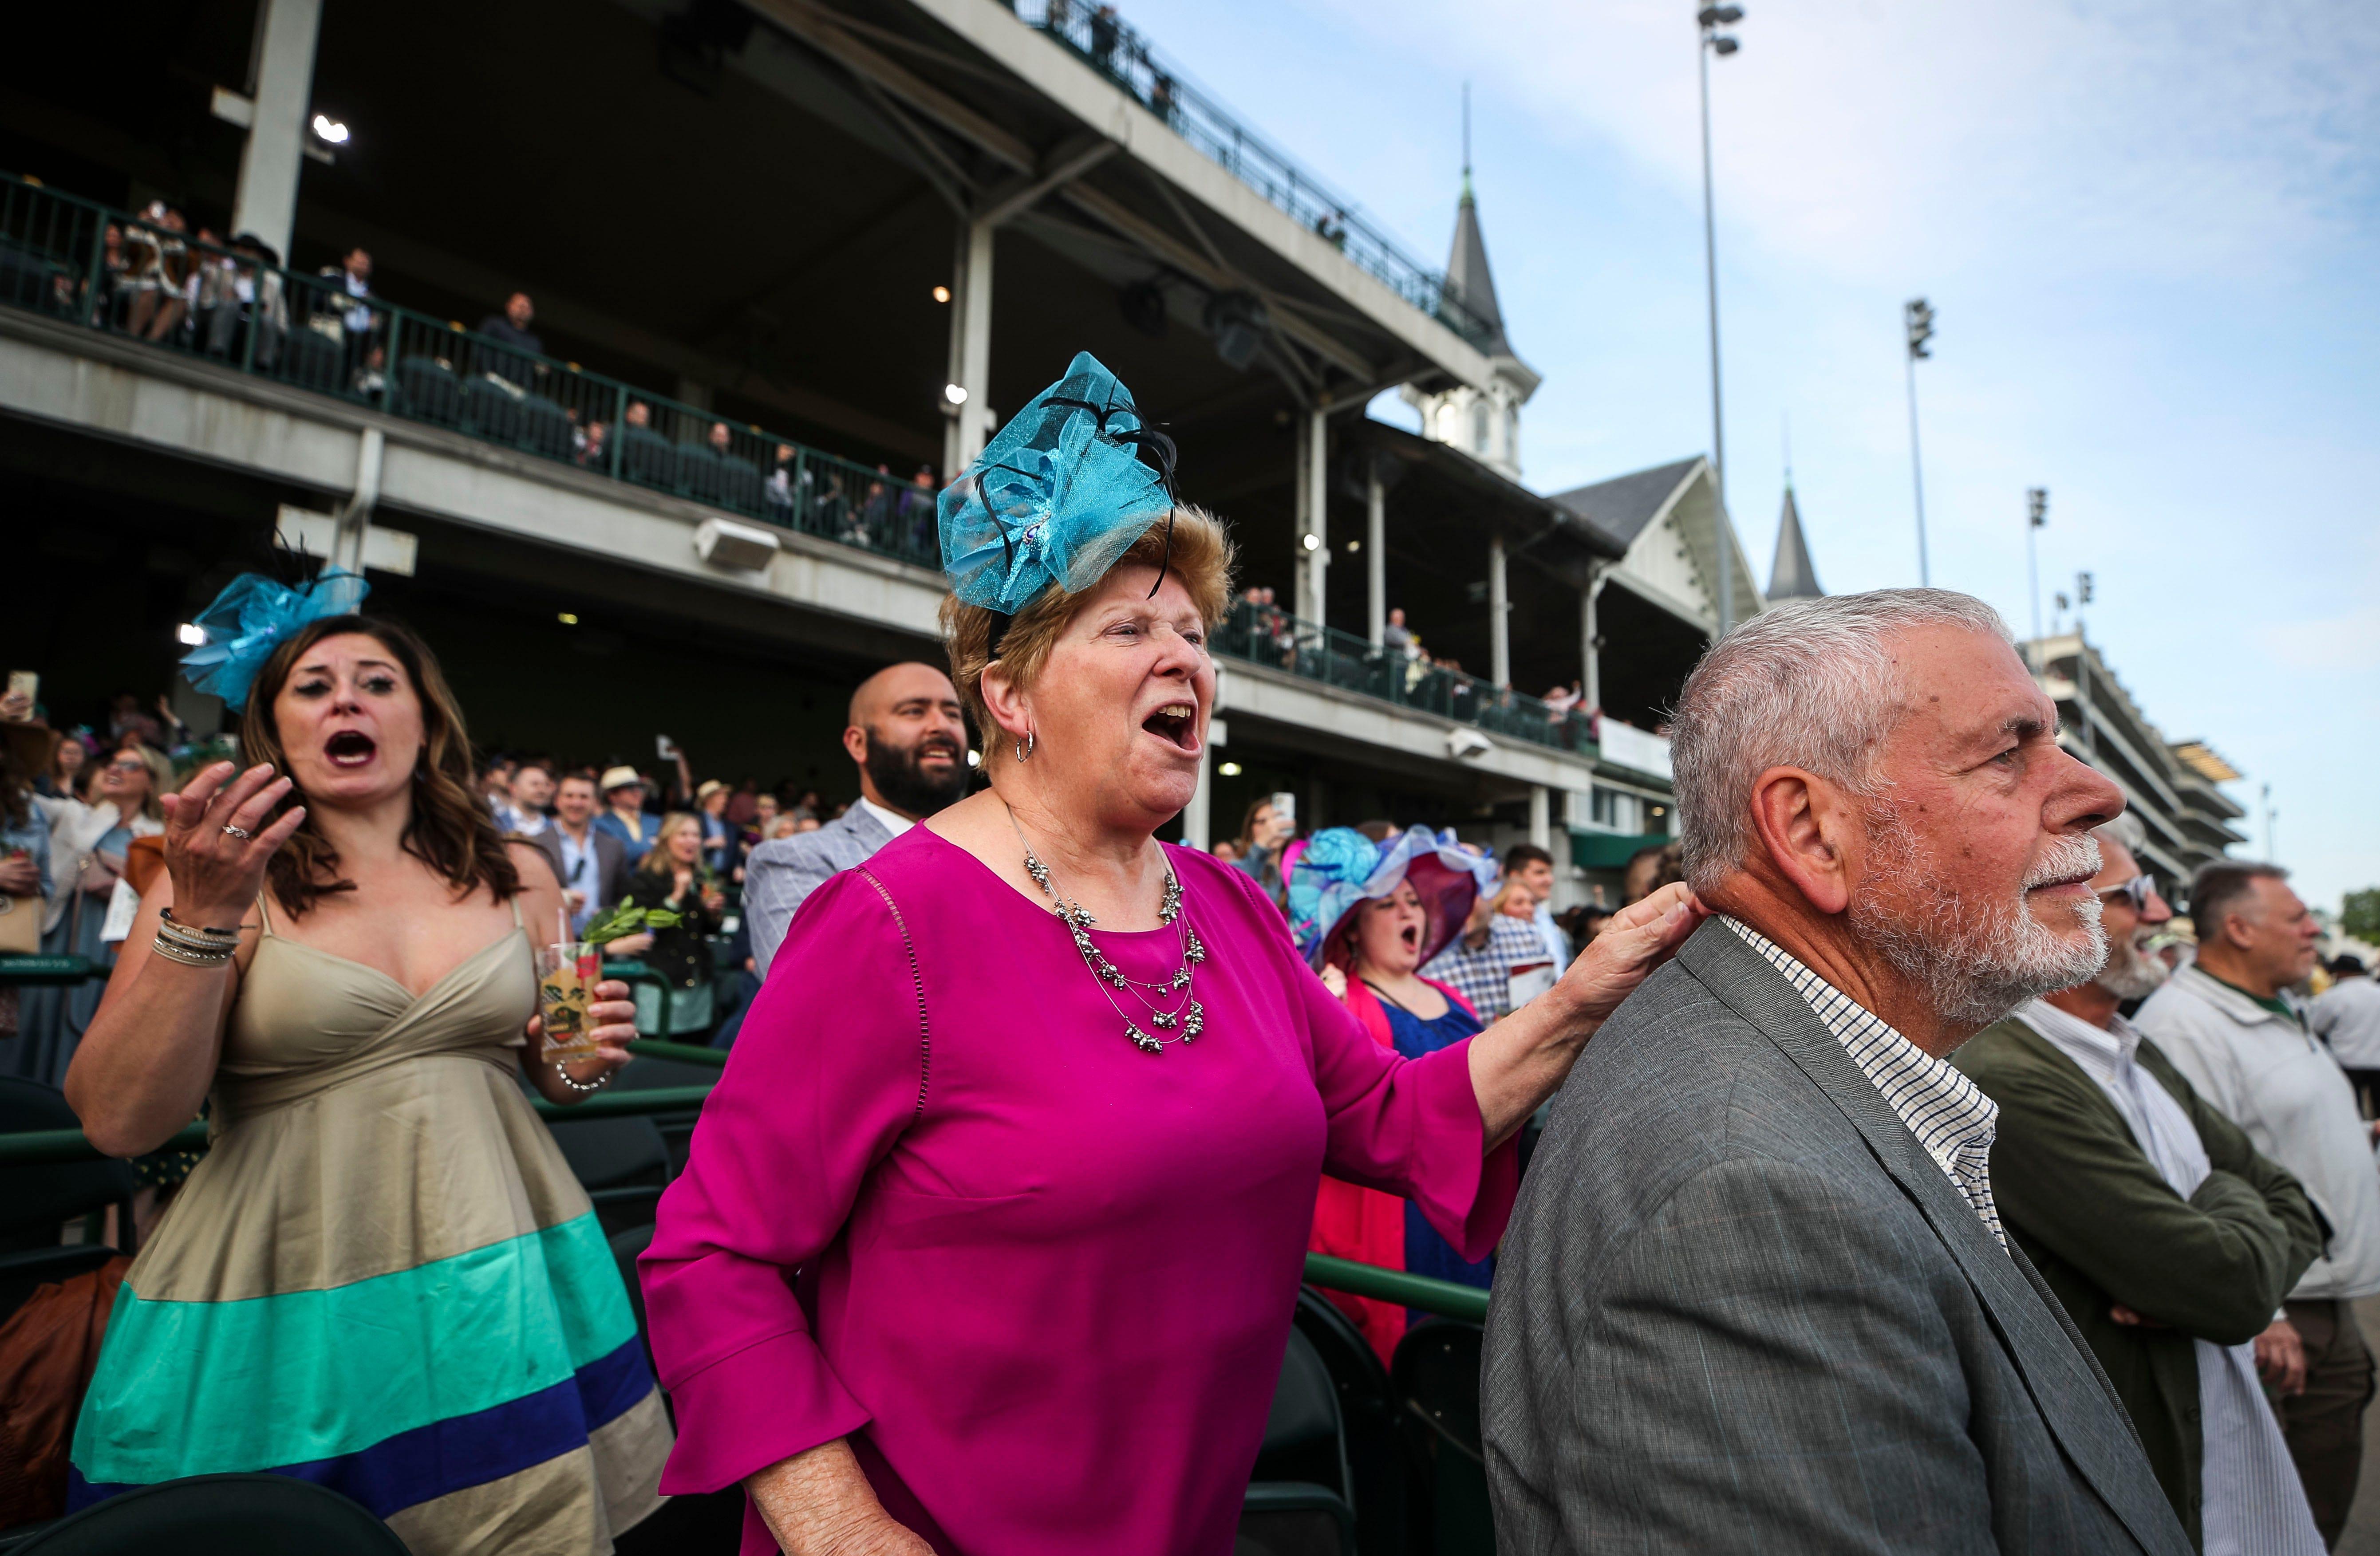 Marsha Dock cheers on her horse as daughter Emily Sheti reacts during to the opening night of the Spring Meet on Saturday, April 29, 2023, as Derby week starts at Churchill Downs in Louisville, Ky. It was Marsha and husband Don - at far right - first time at track since 1971, when they saw the Derby from the infield.